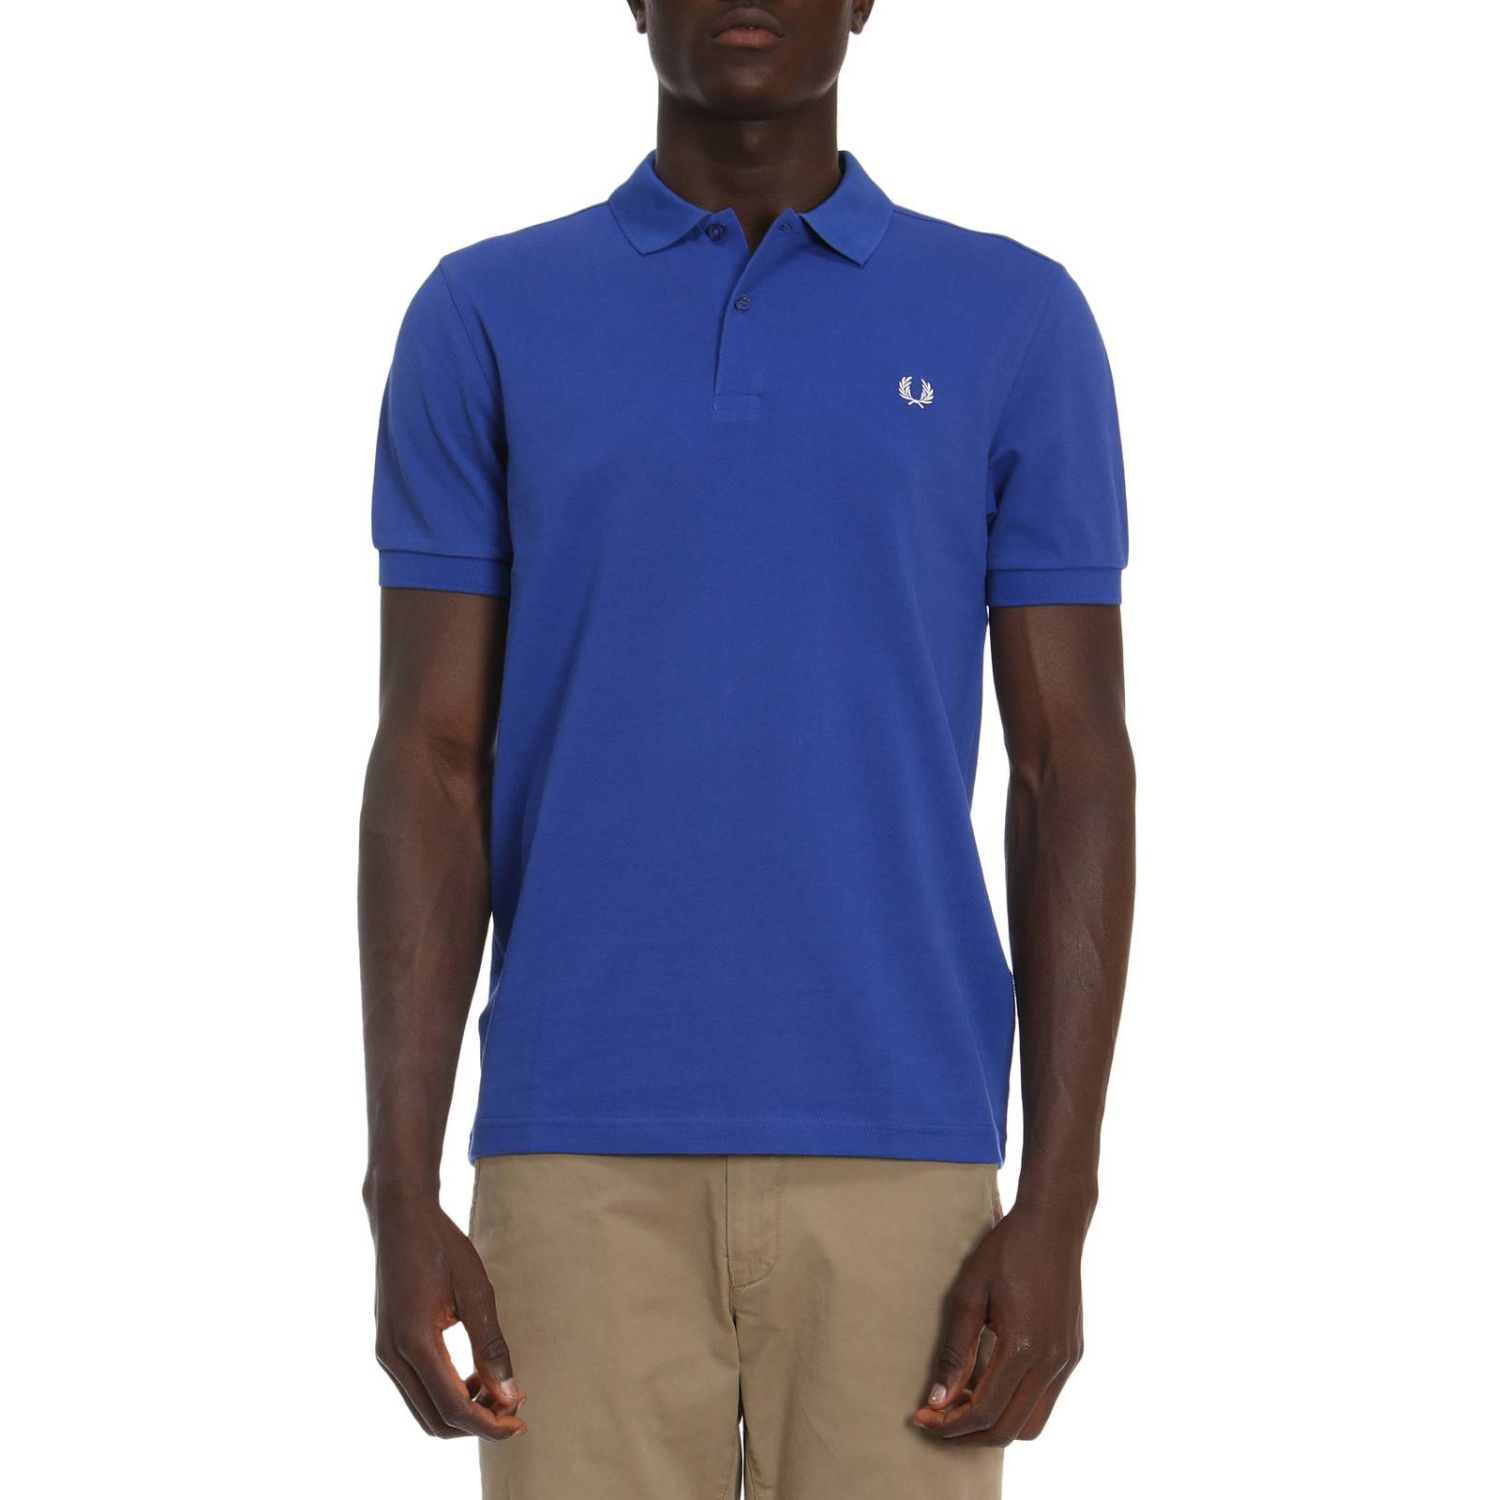 Fred Perry Outlet: T-shirt men | T-Shirt Fred Perry Men Multicolor | T ...